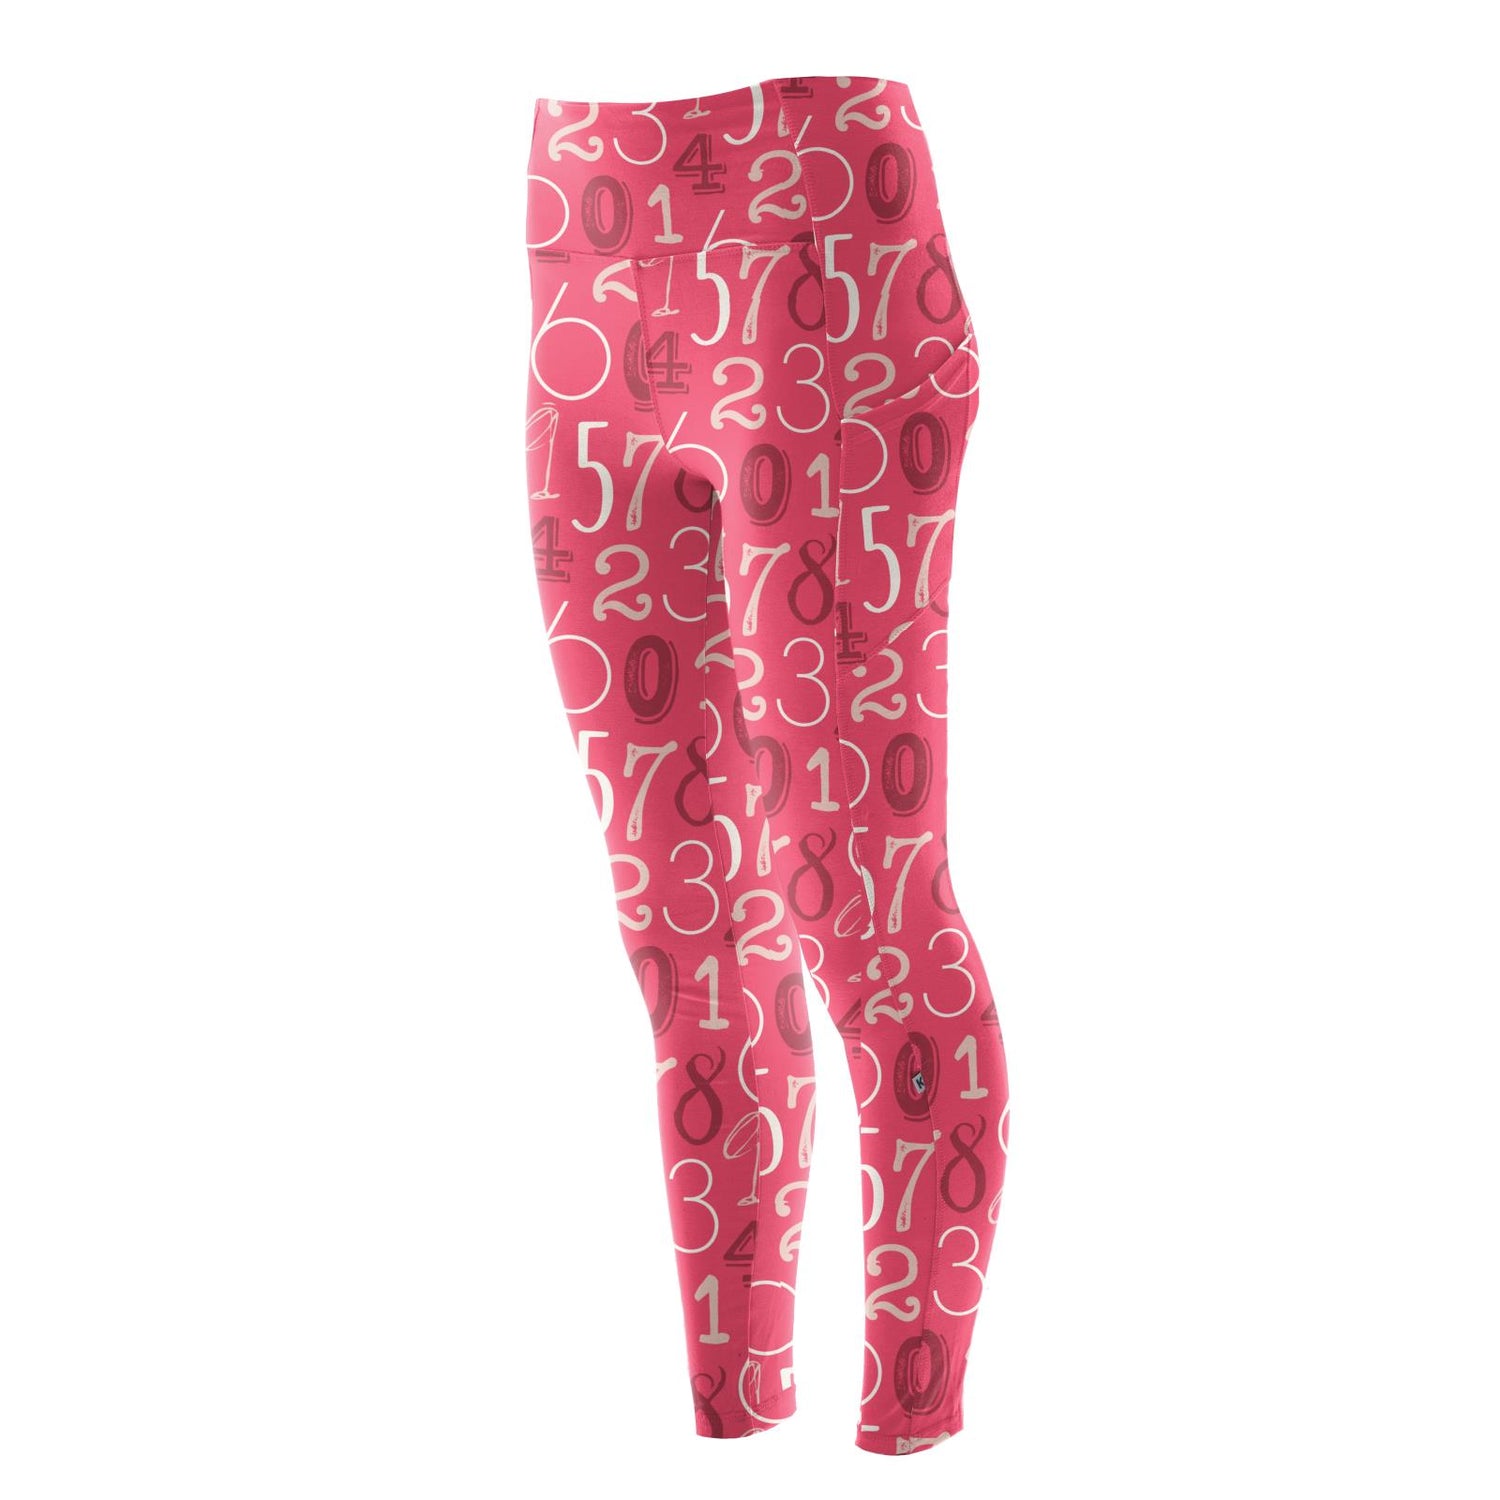 Women's Print Luxe Stretch Leggings with Pockets in Taffy Math